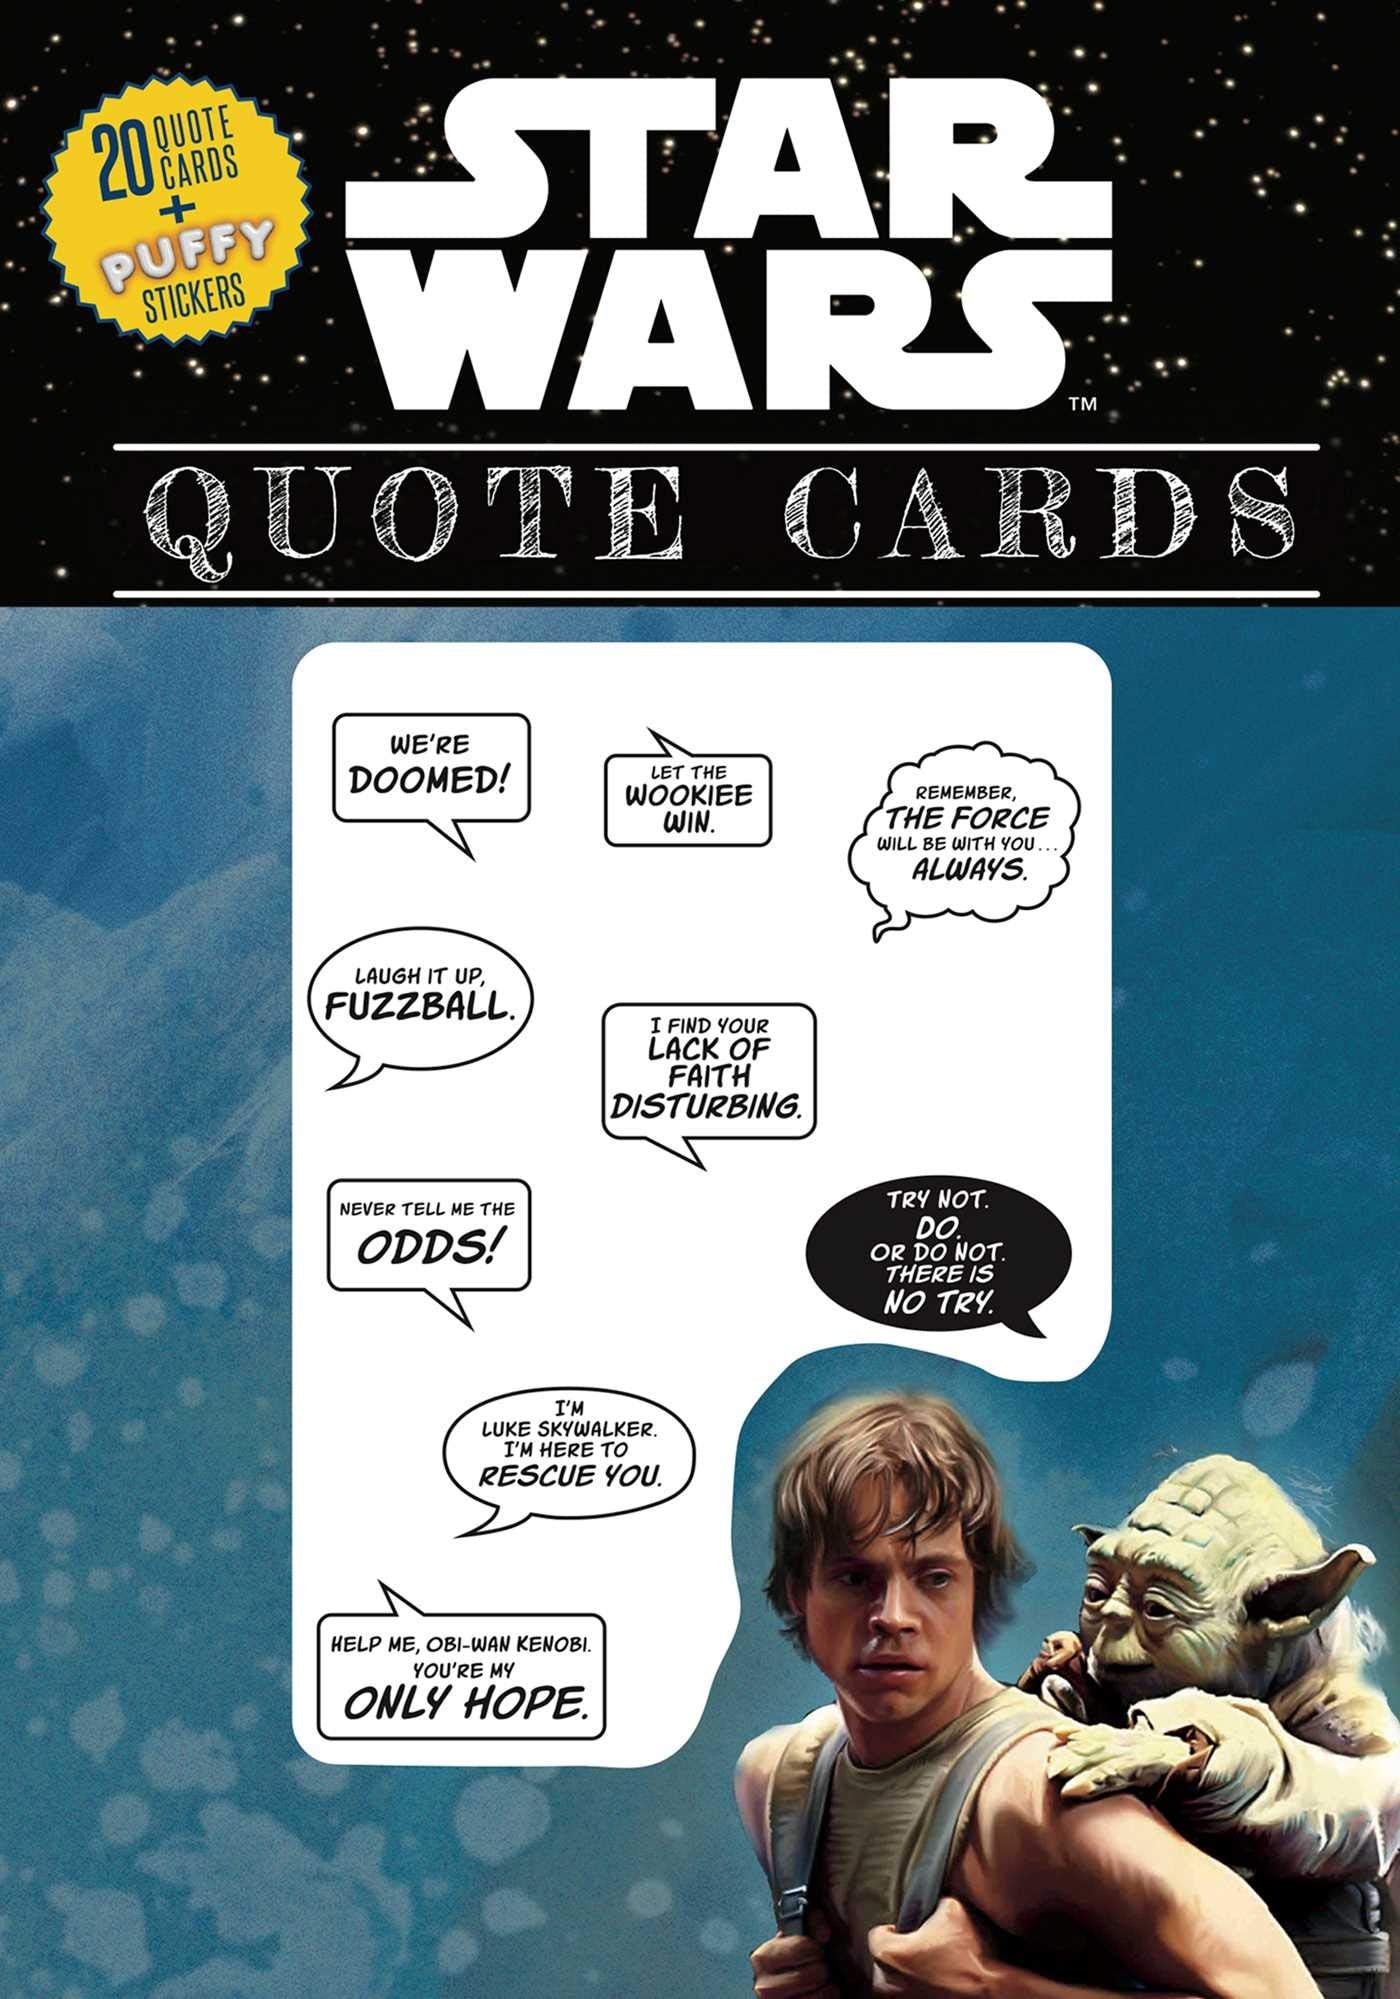 Star Wars Quote Cards